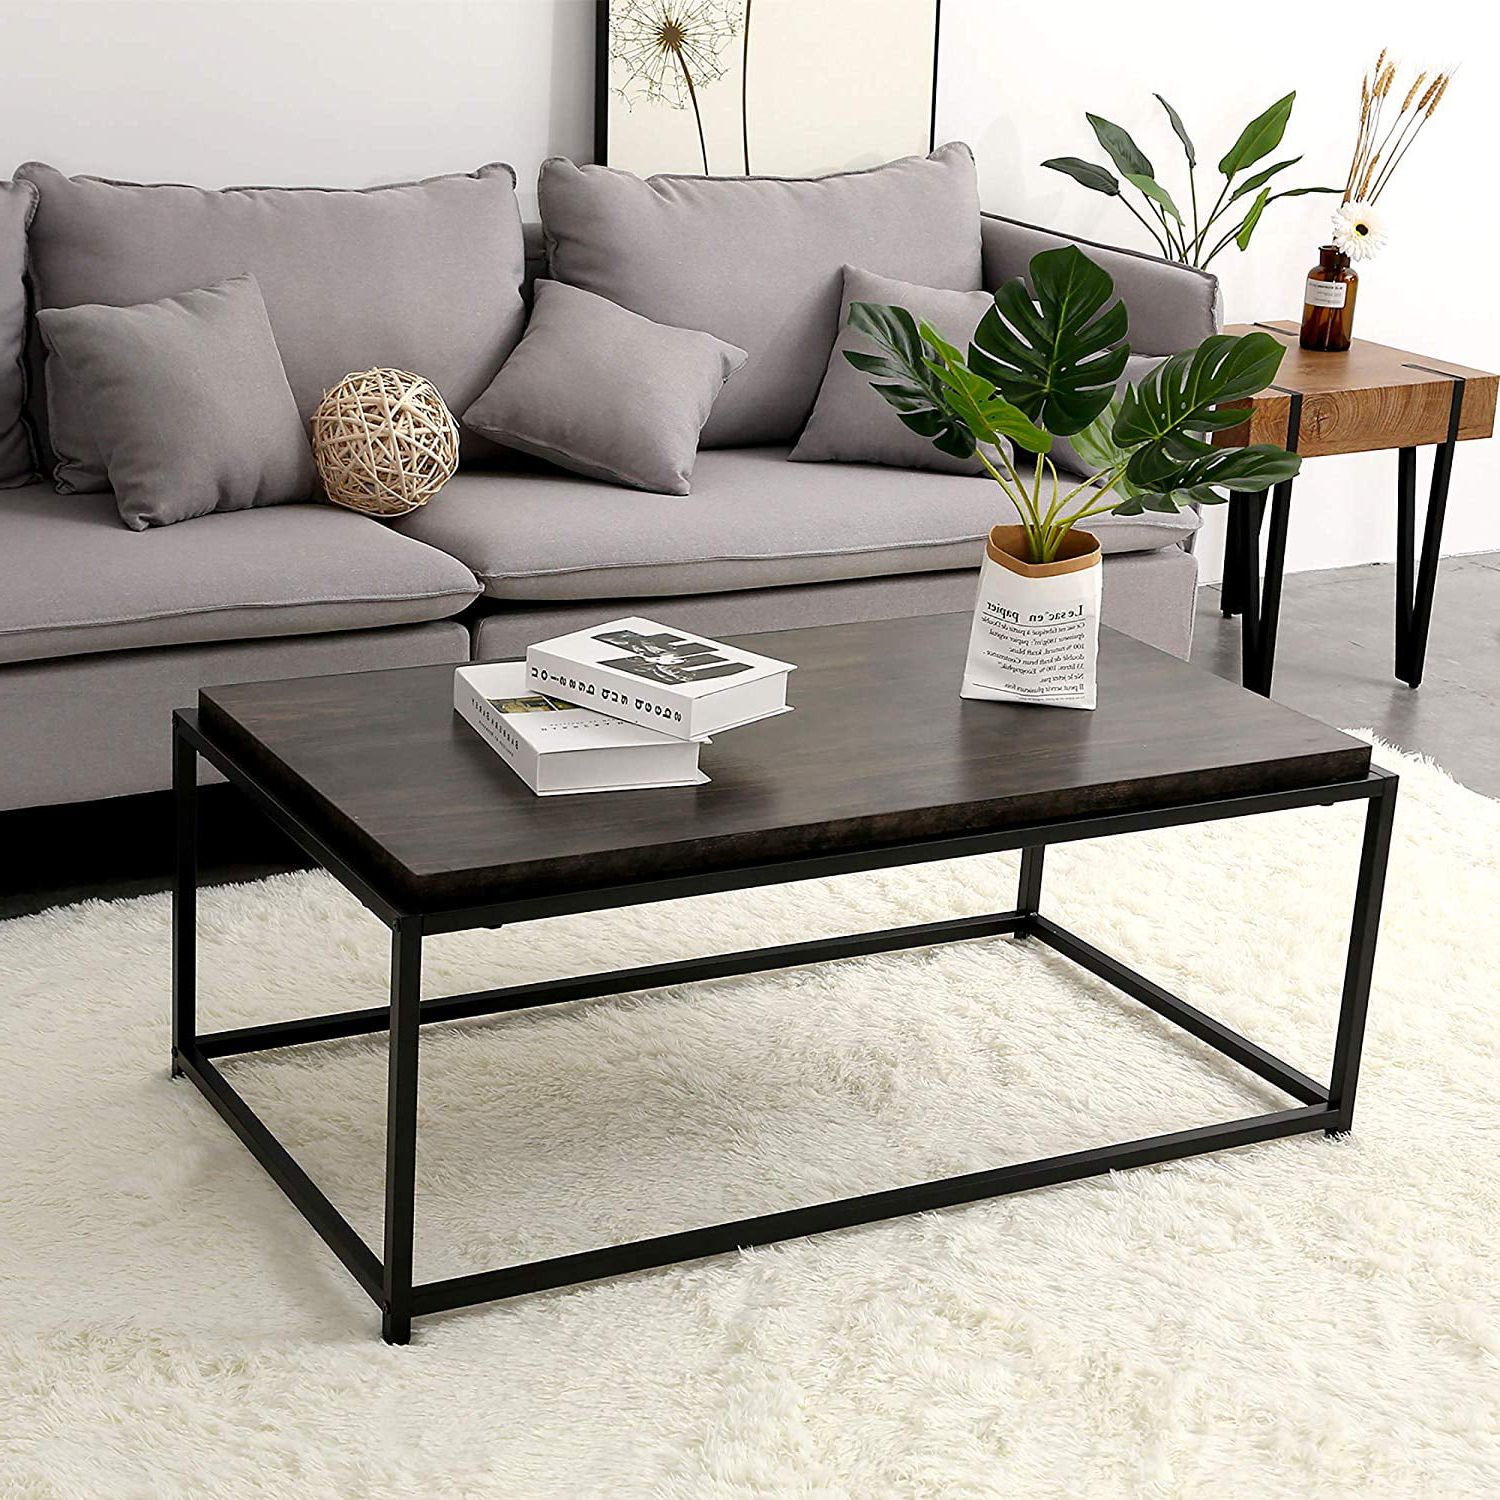 Ivinta Wood Coffee Table Modern Industrial Space Saving Couch Living Pertaining To Well Liked Espresso Wood Finish Coffee Tables (Photo 5 of 15)